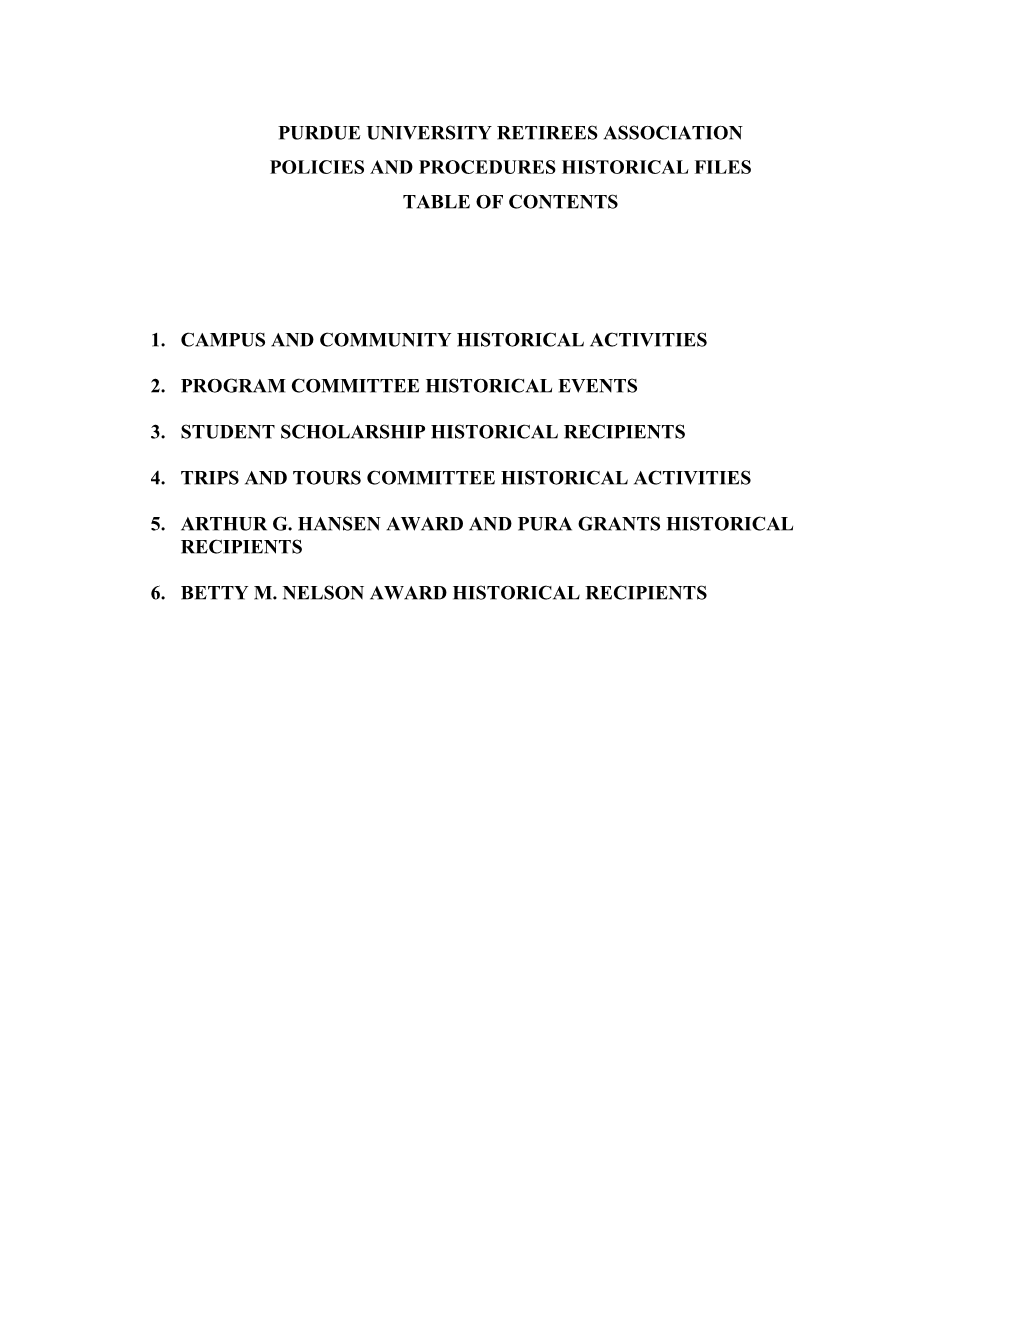 Purdue University Retirees Association Policies and Procedures Historical Files Table of Contents